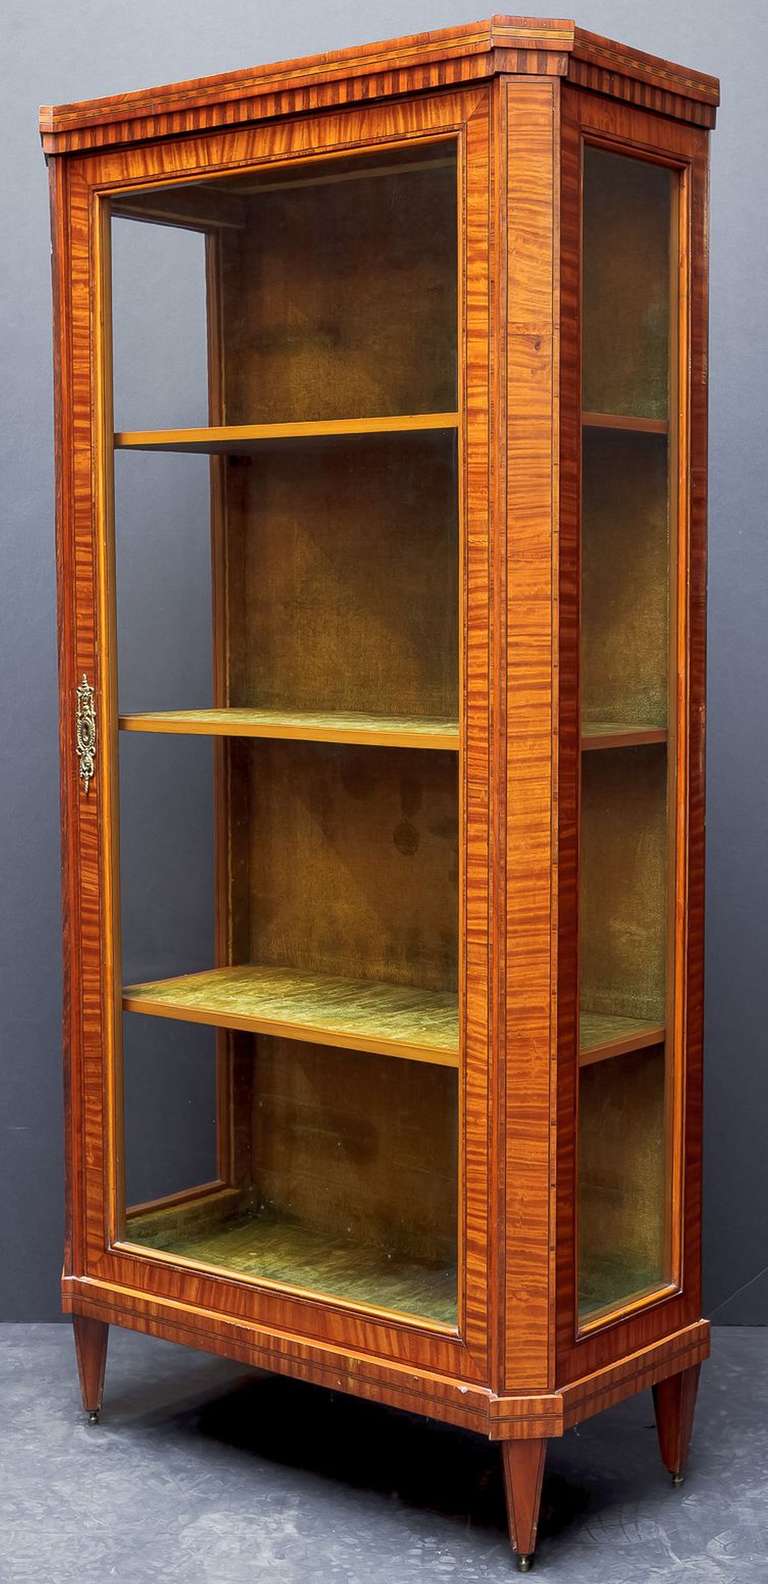 19th Century French Display Case or China Cabinet of Satin Wood